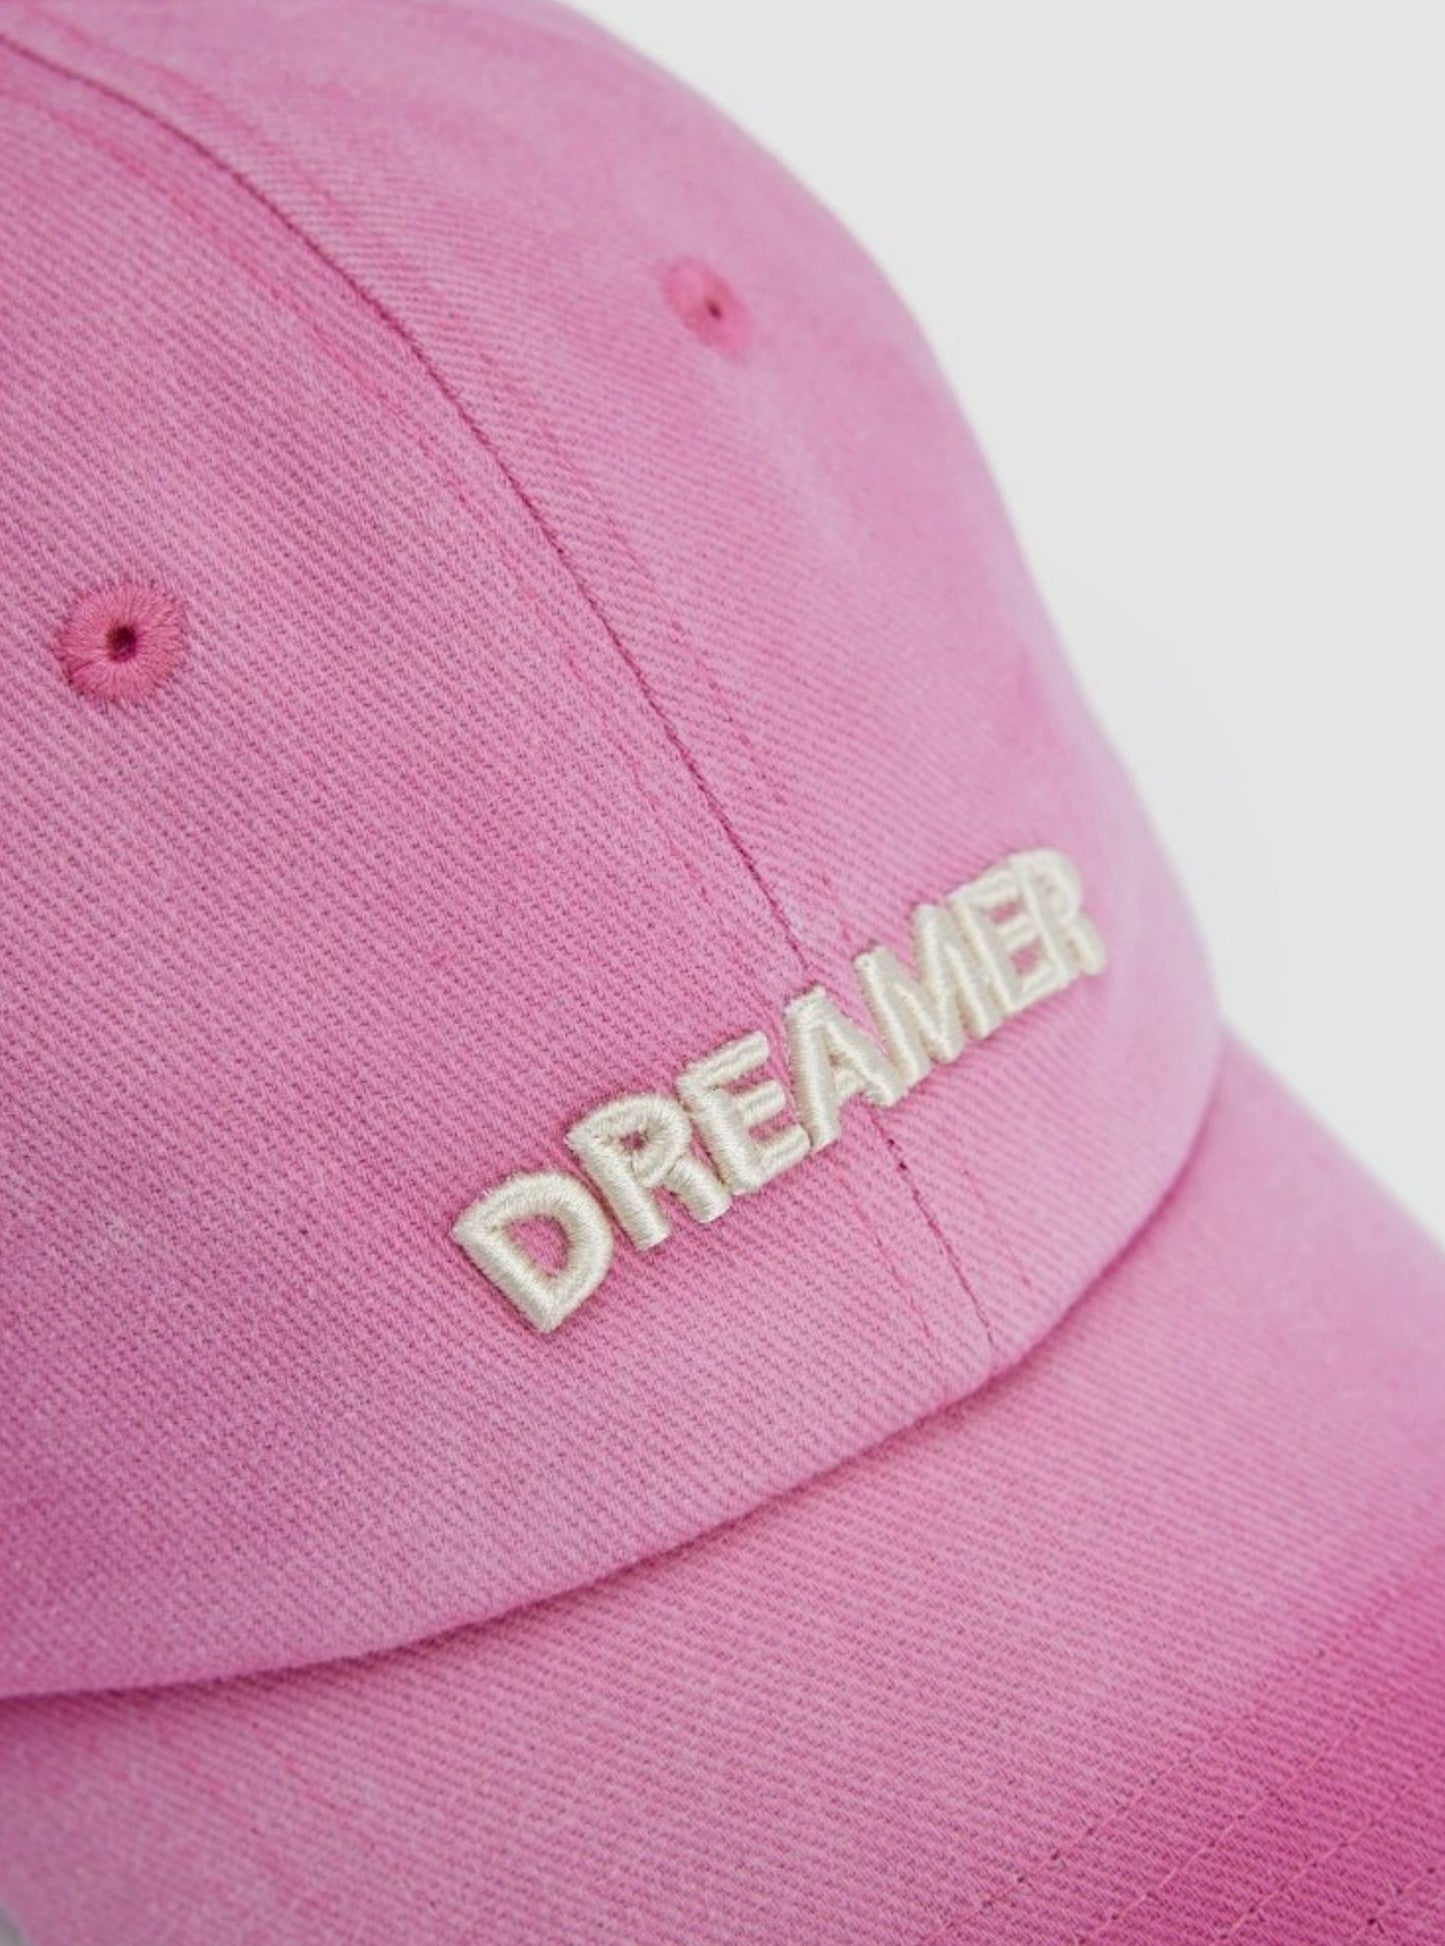 Gradient embroidered baseball cap